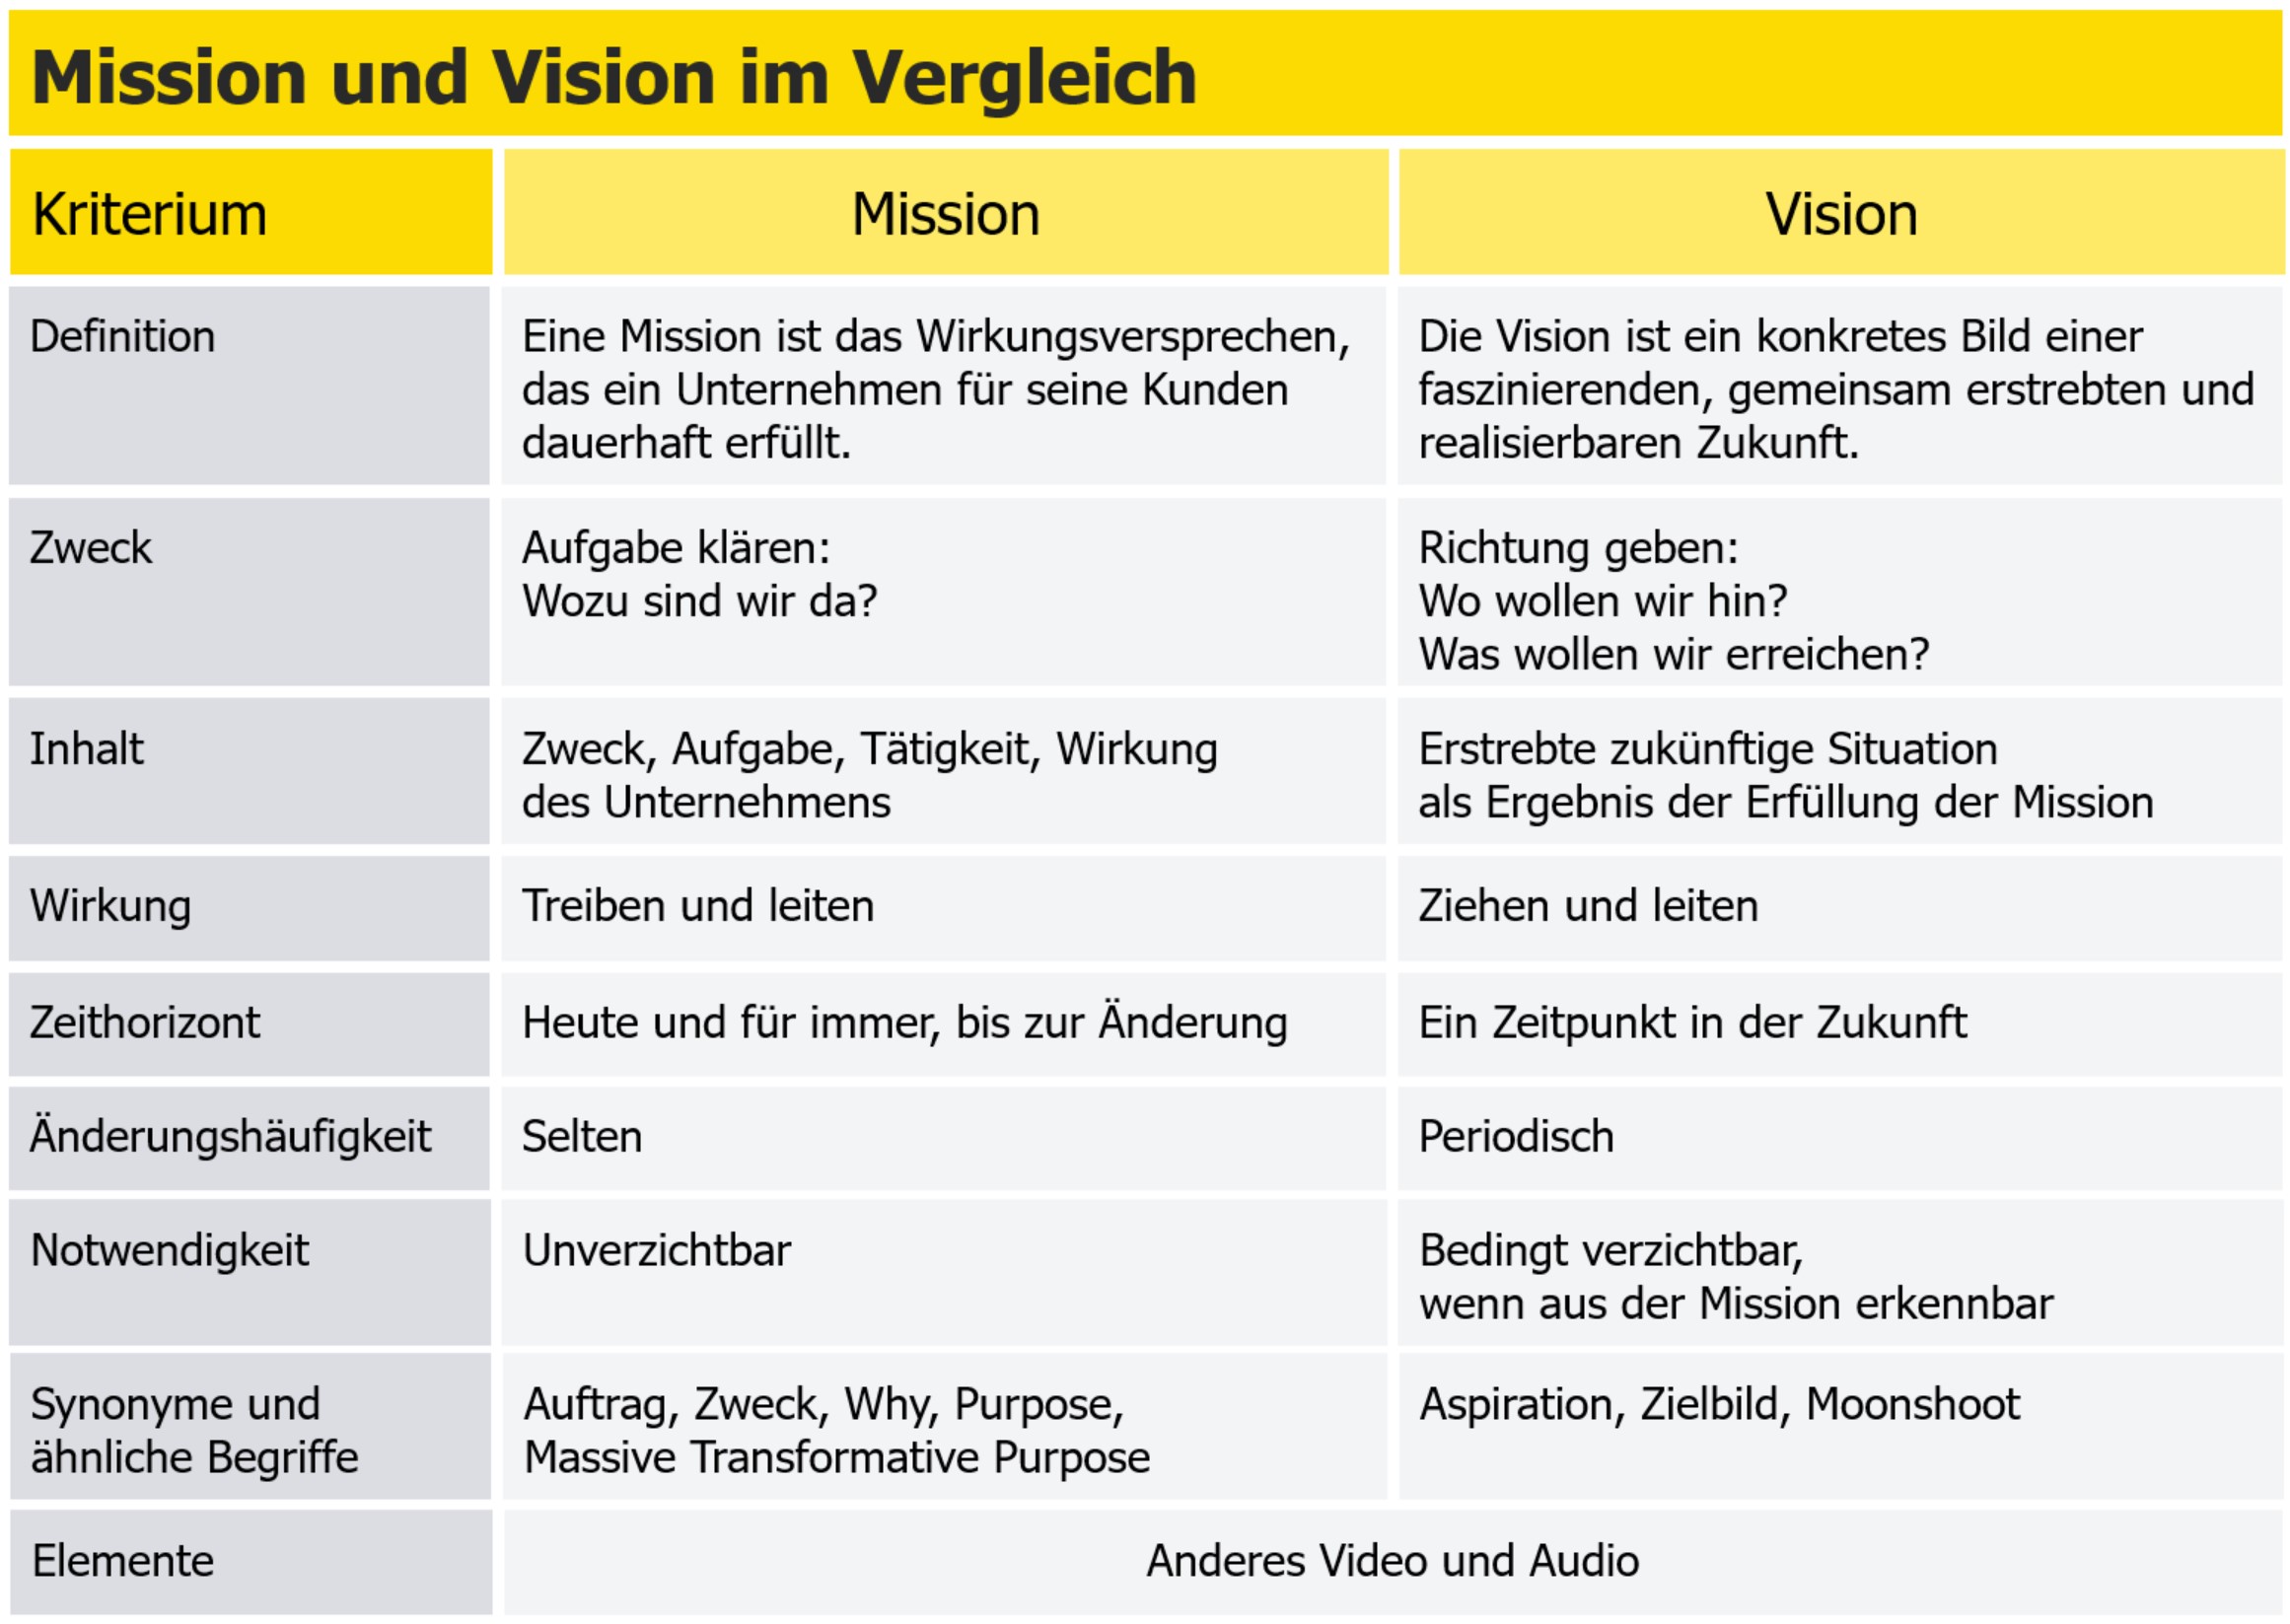 Difference between mission and vision by criteria